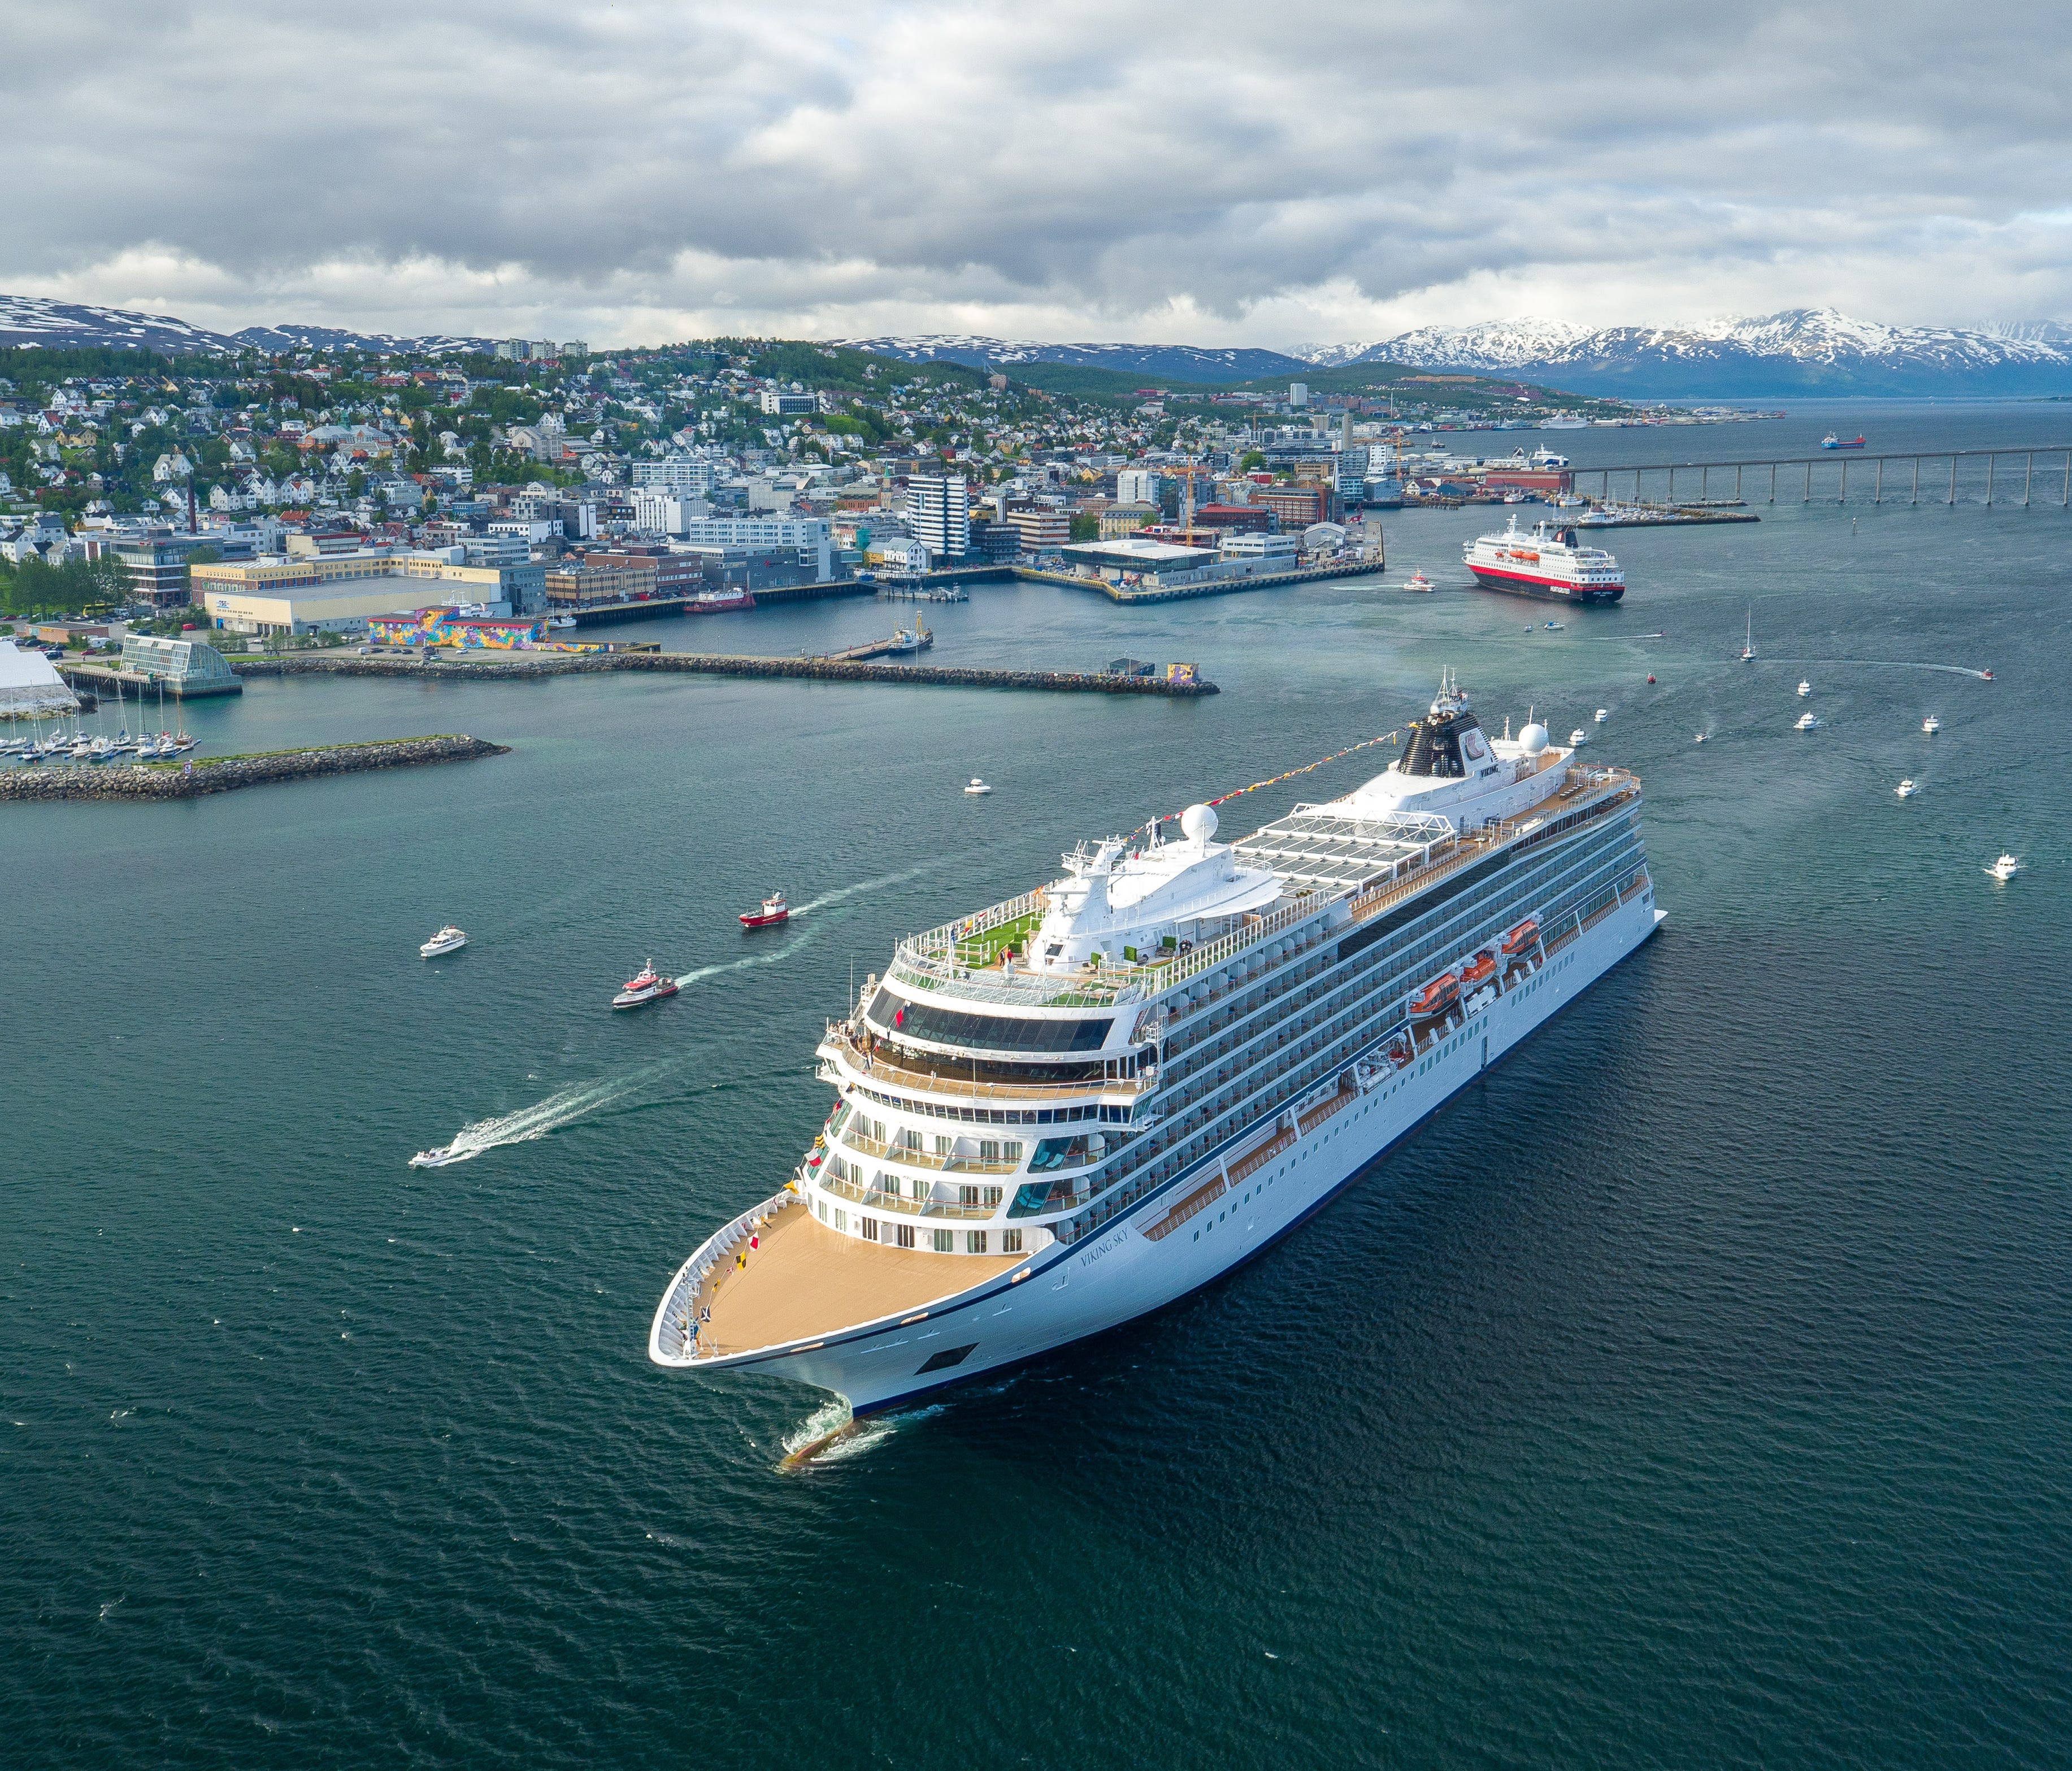 Like Viking Sky, shown here in Tromso, Norway, Viking Sun will be an upscale ship designed for destination-intensive voyages around the globe.